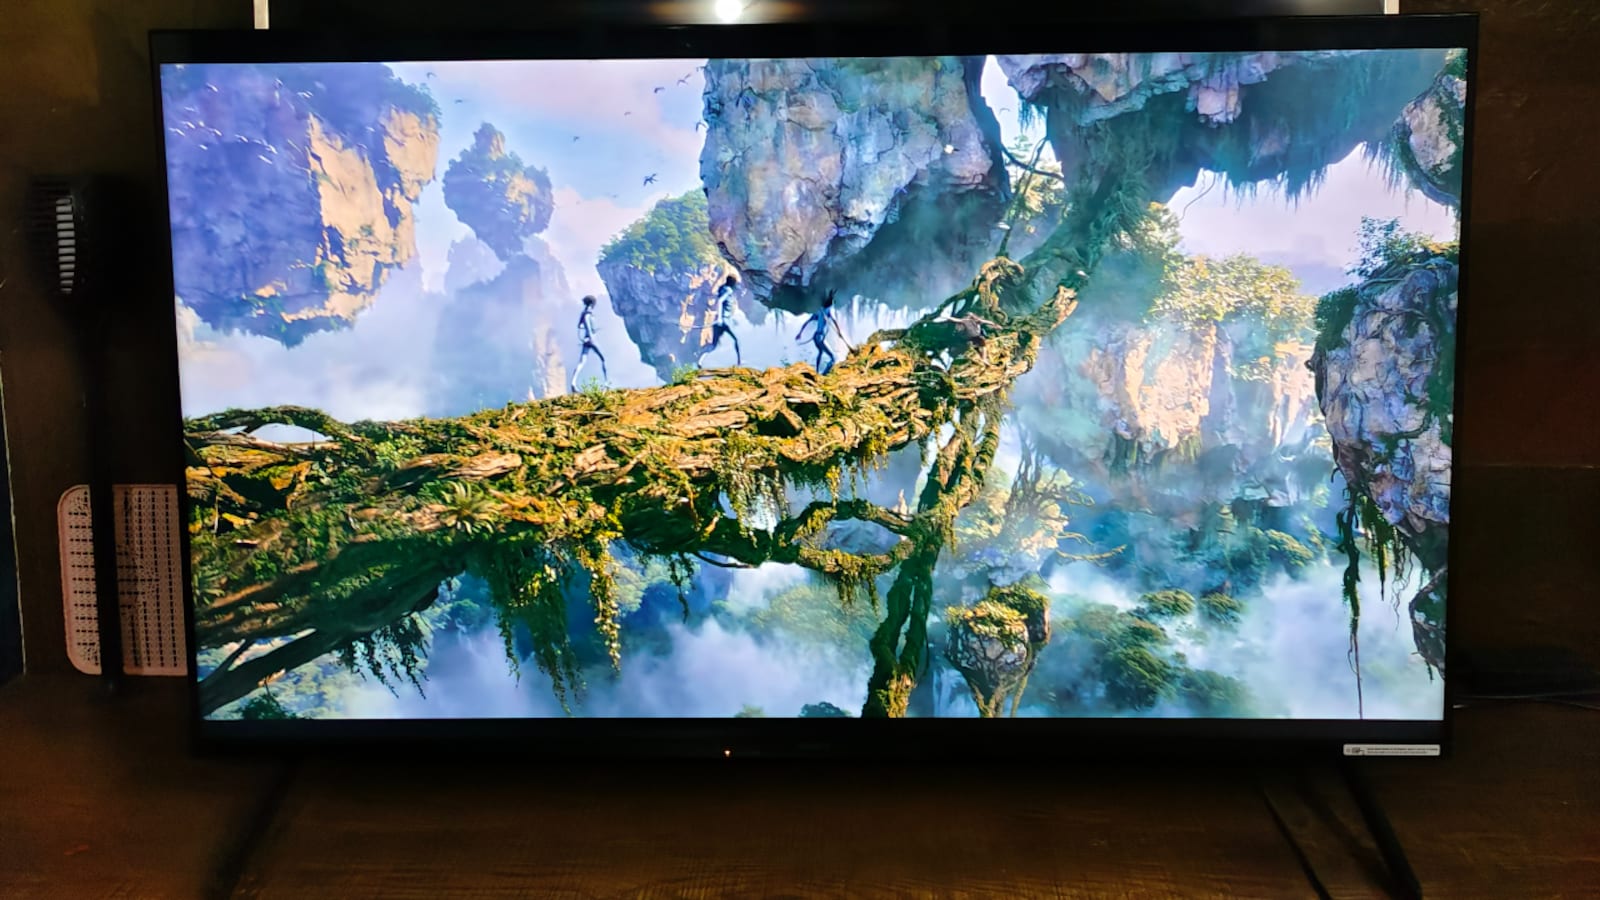 Sony Bravia X80K TV Review: Sony's LED TV has ambitions